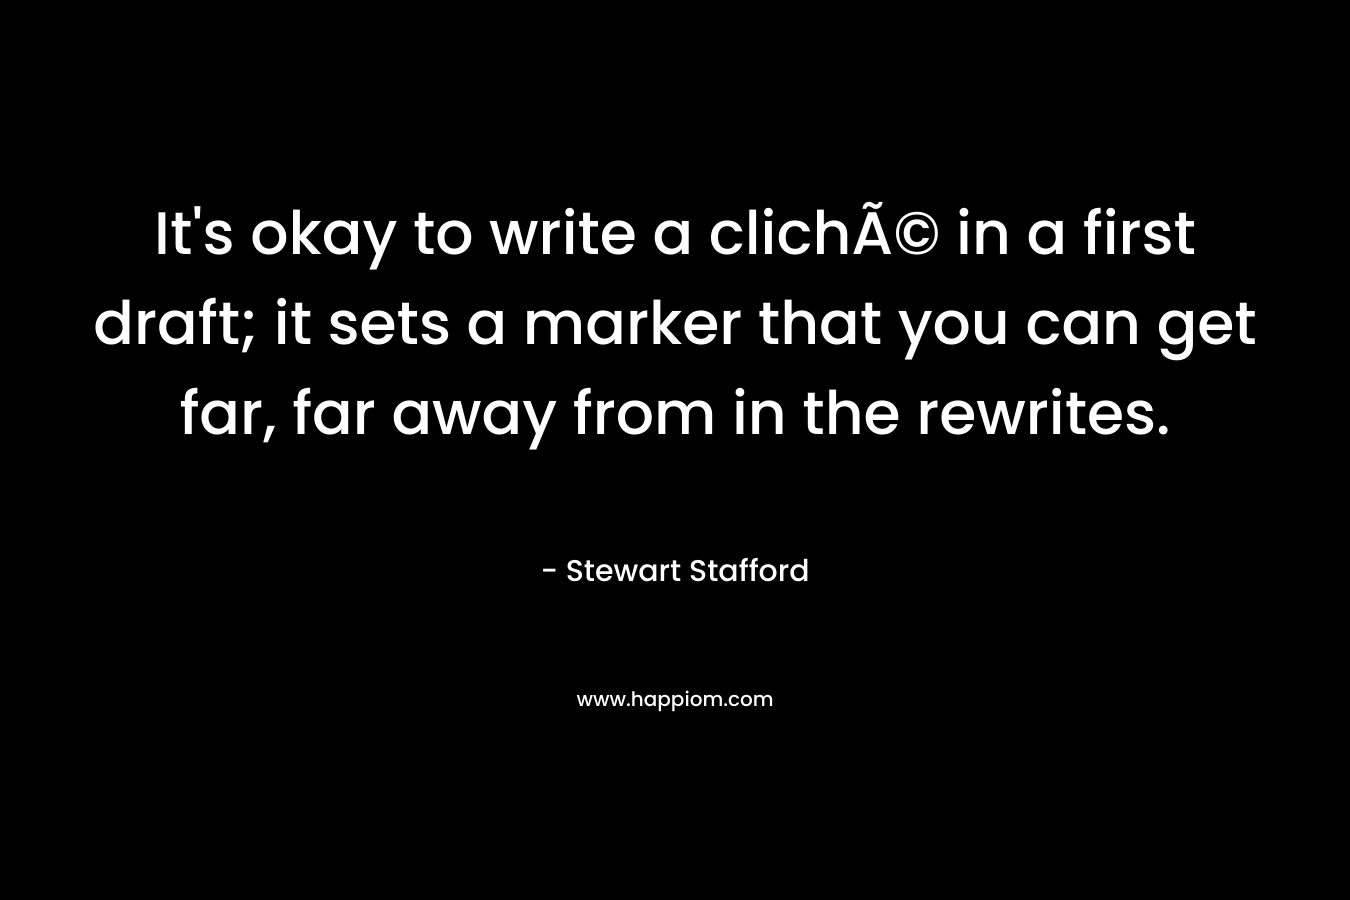 It’s okay to write a clichÃ© in a first draft; it sets a marker that you can get far, far away from in the rewrites. – Stewart Stafford